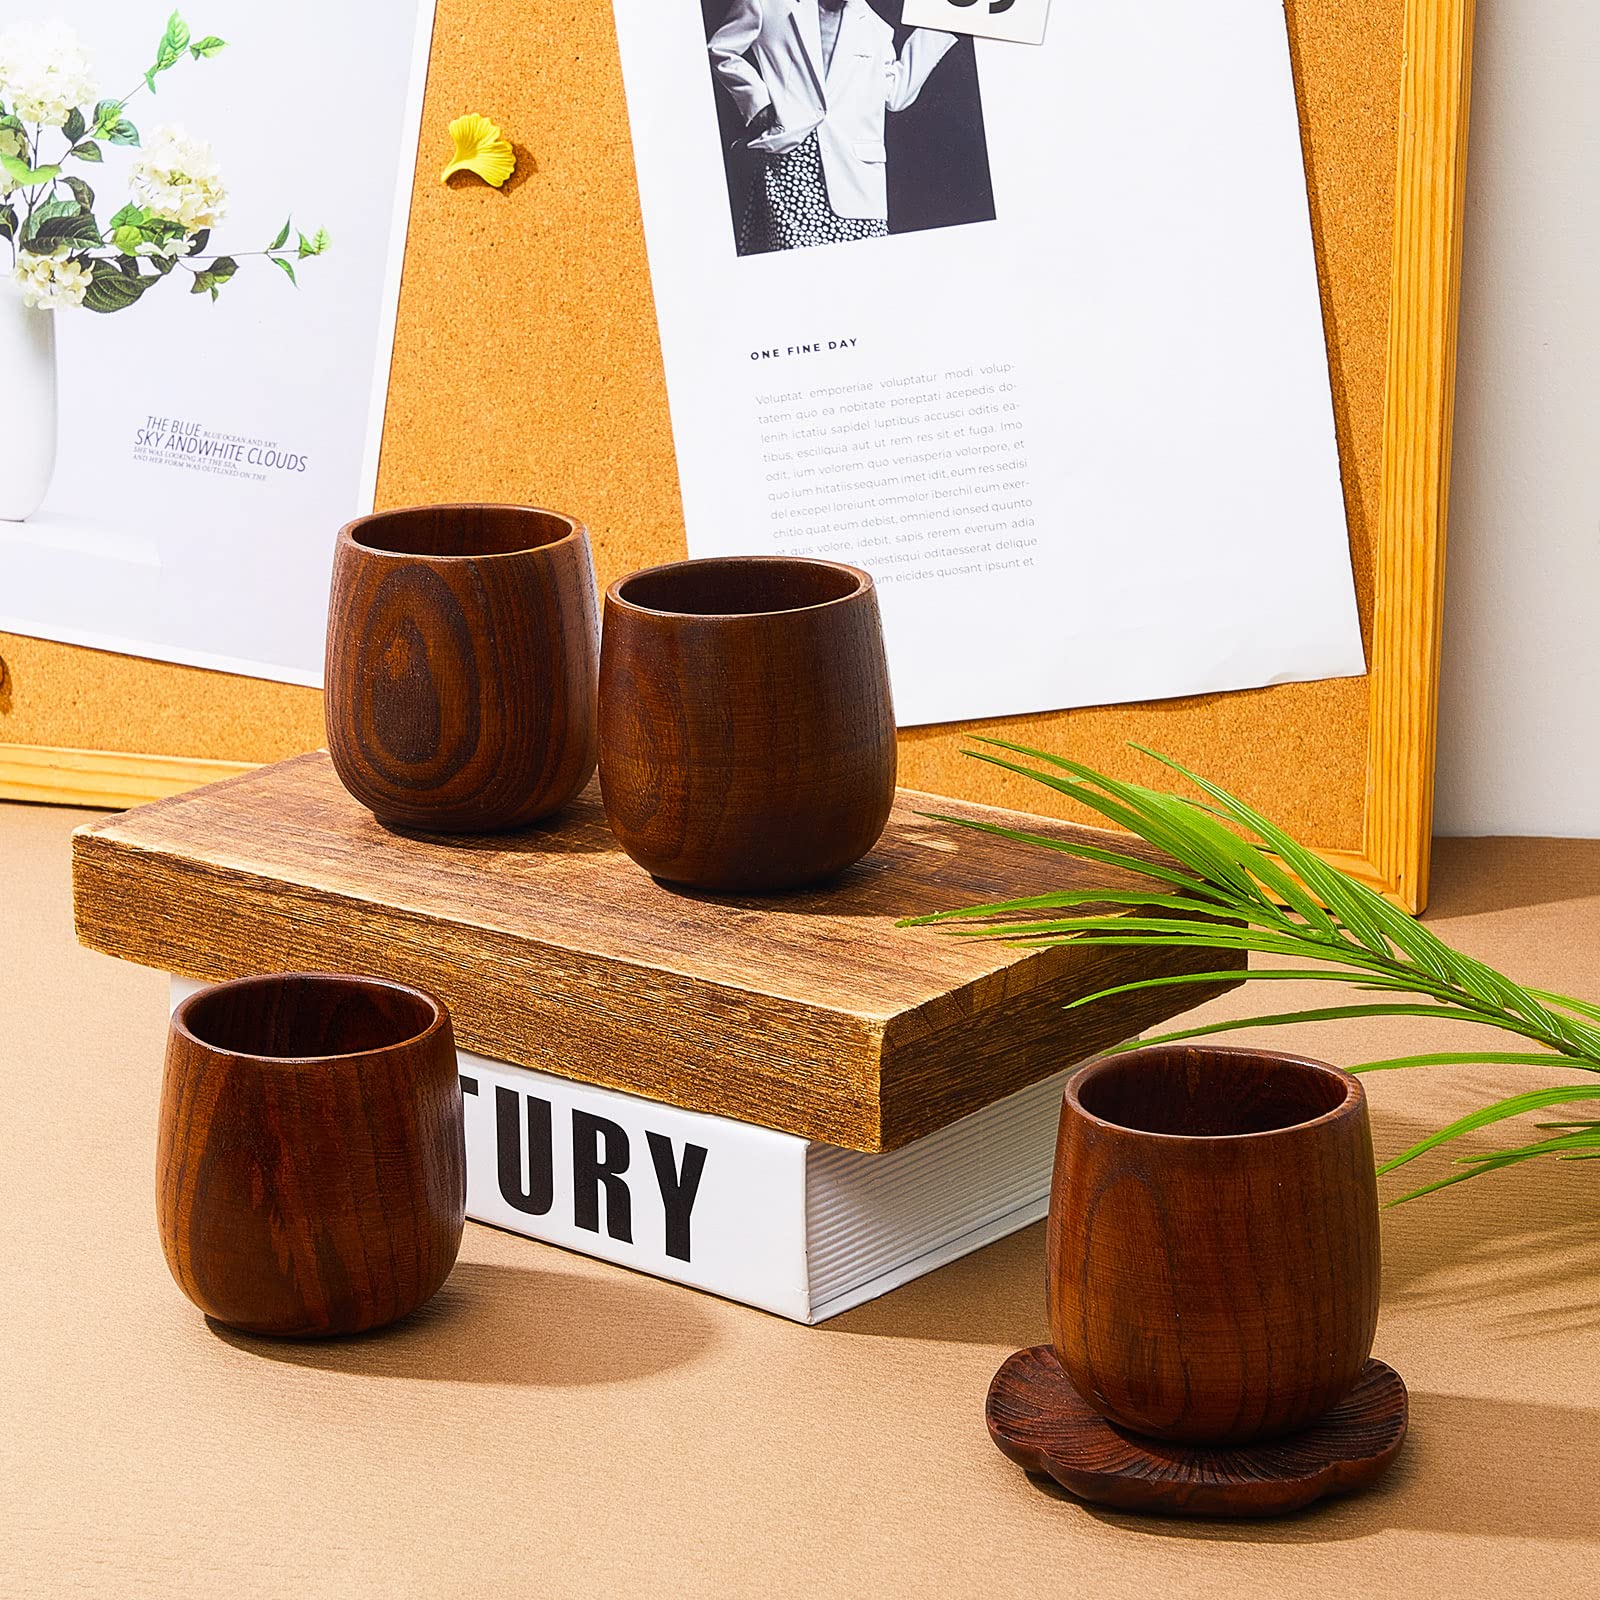 Suclain 6 Pieces 6 oz Wooden Tea Cups Wooden Coffee Cups Wood Teacups Coffee Mug for Drinking Espresso Tea Beer Wine Water Restaurant Cafe Home Serving Entertain, Cannot Use Dishwasher